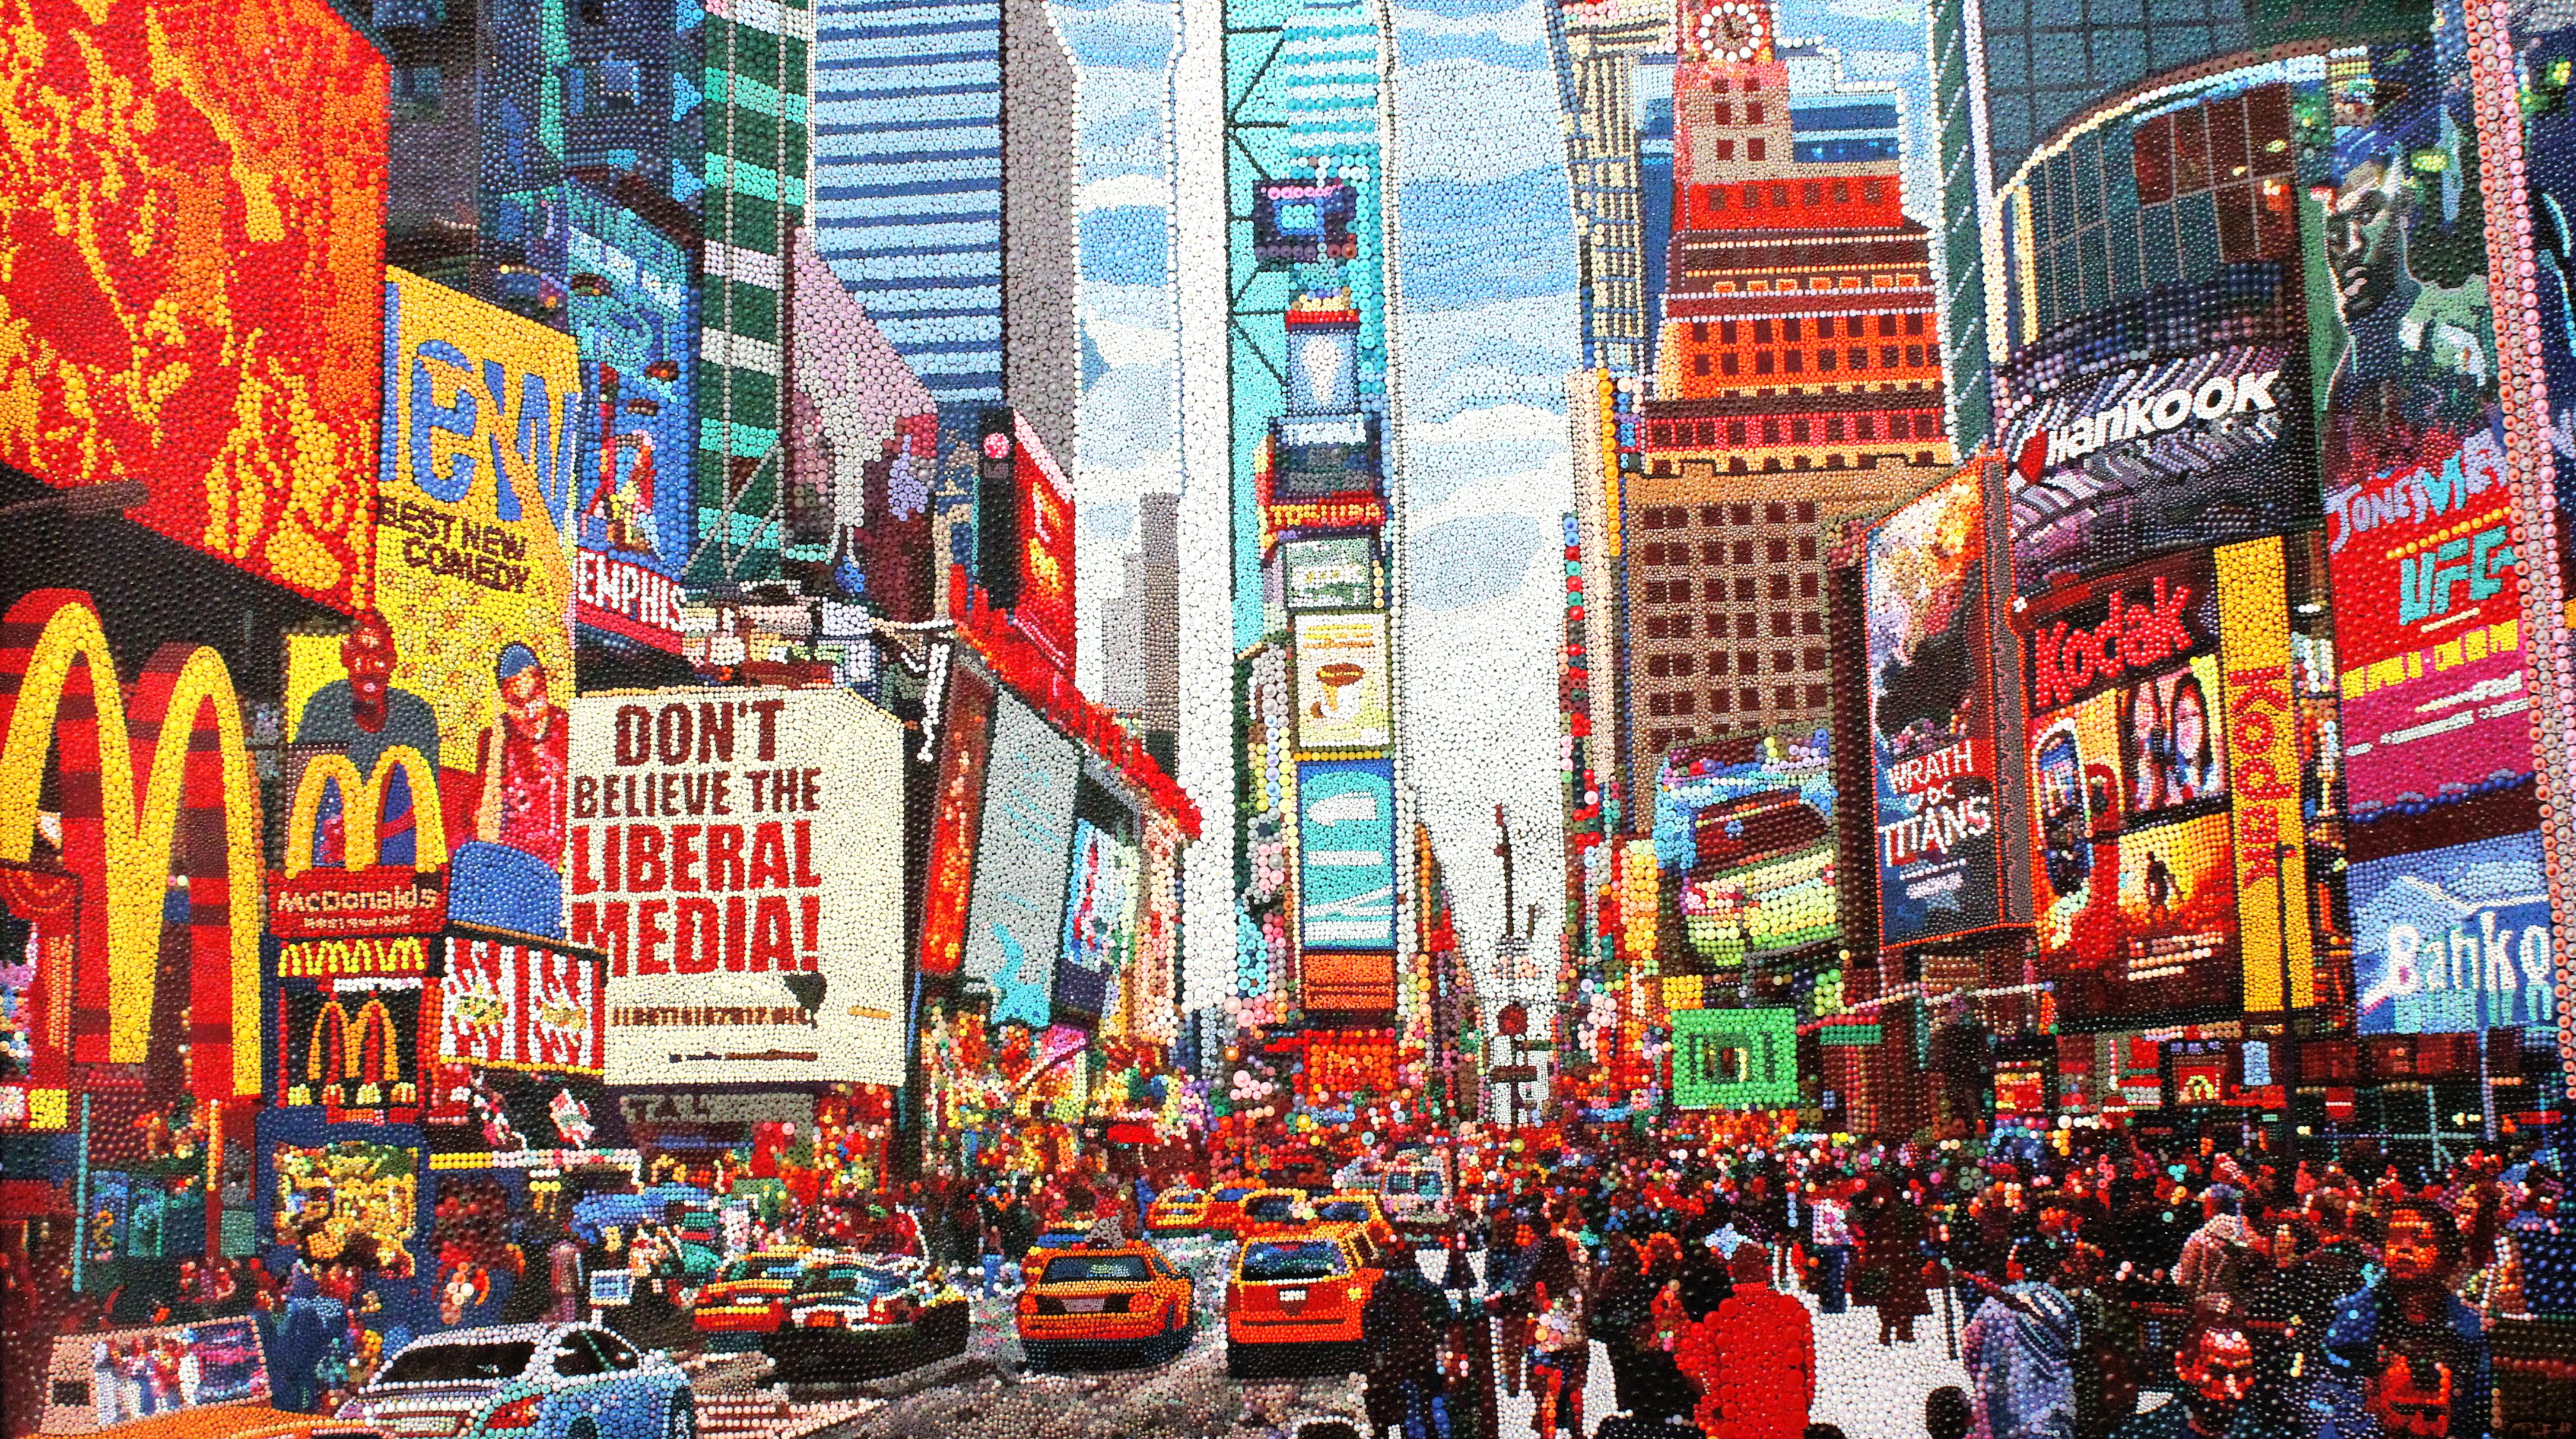 Times Square, Acrylic on Canvas - Mixed Media Art by Ophear 